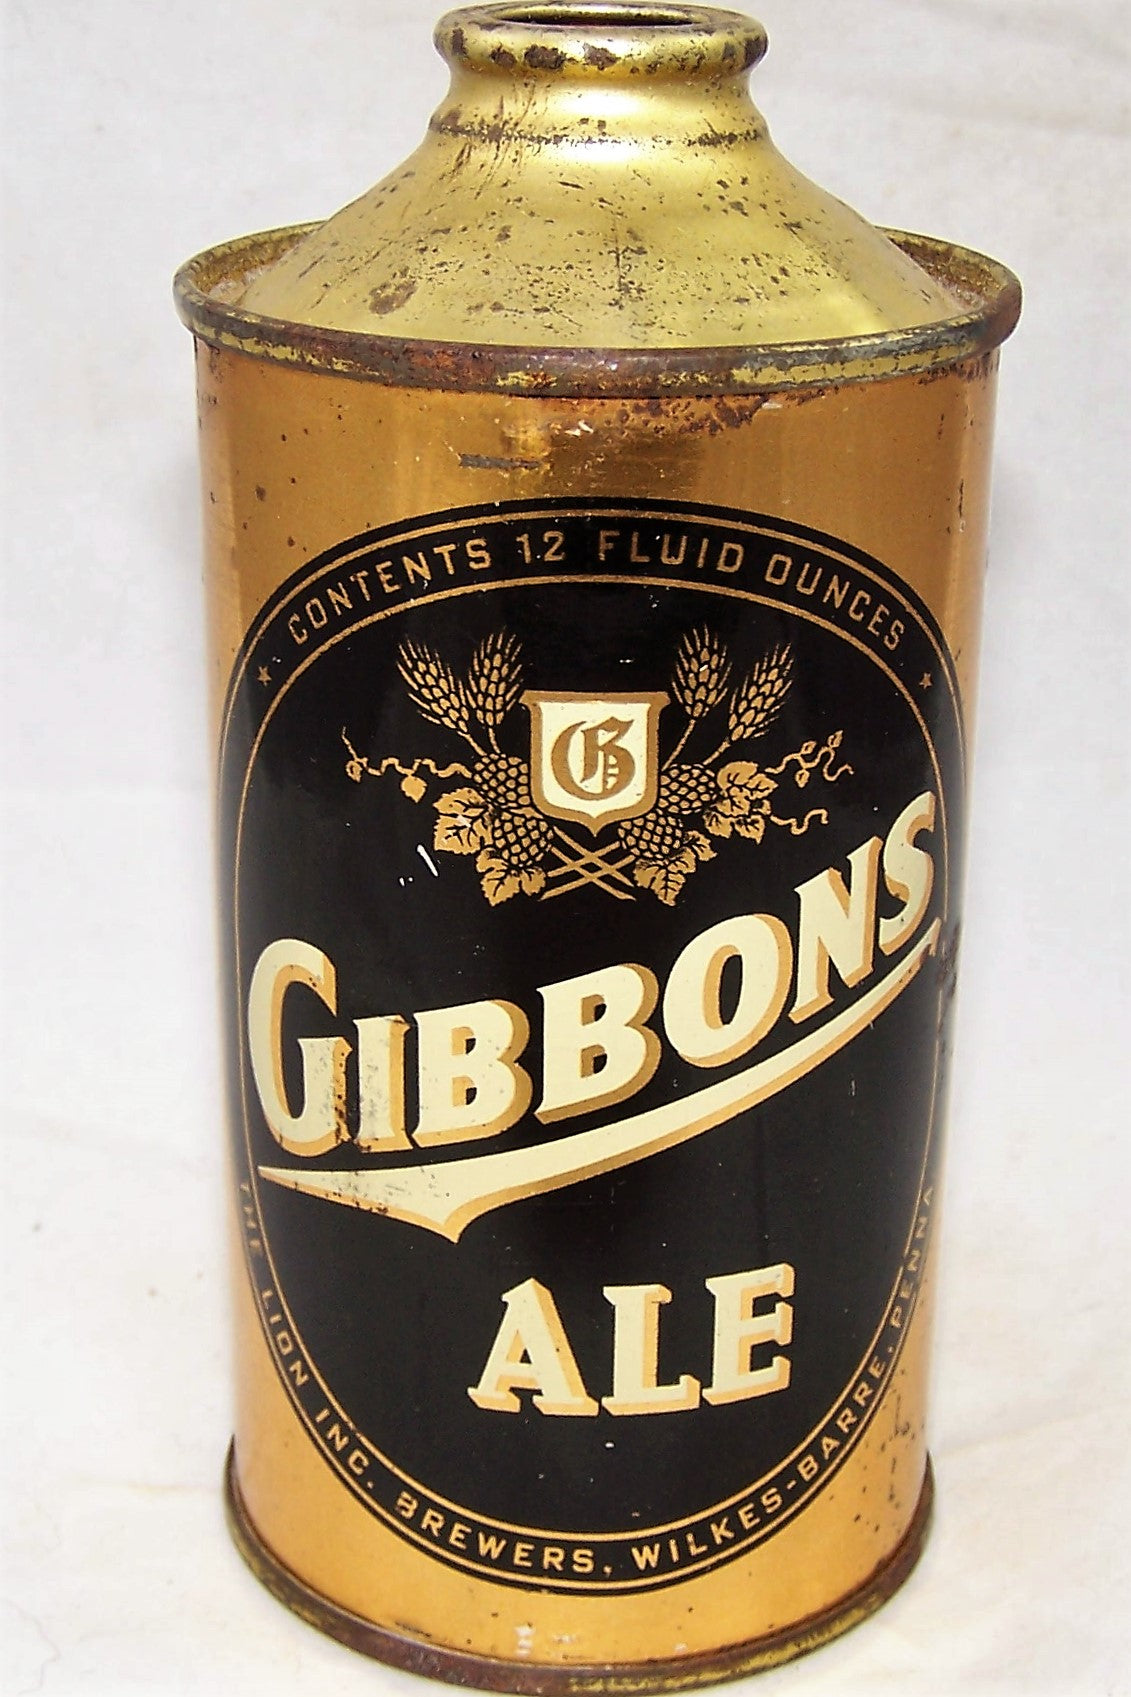 Gibbons Ale USBC 164-25, Grade 1- Sold on 05/19/19